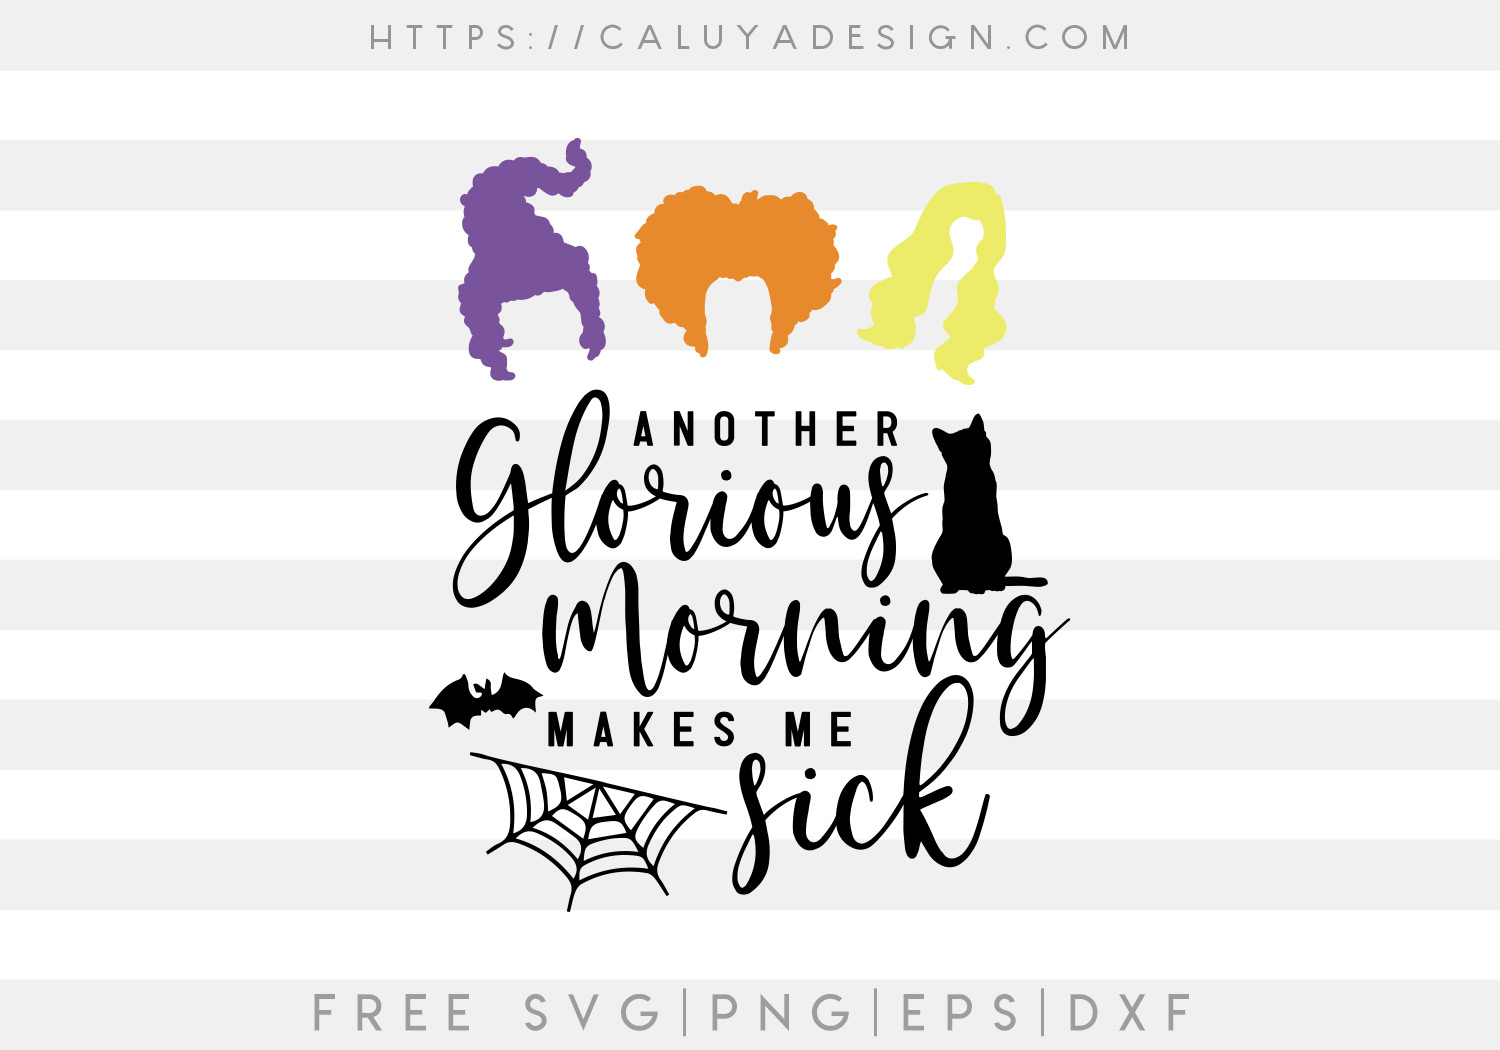 Free Another Glorious Day Hocus Pocus SVG Cut File